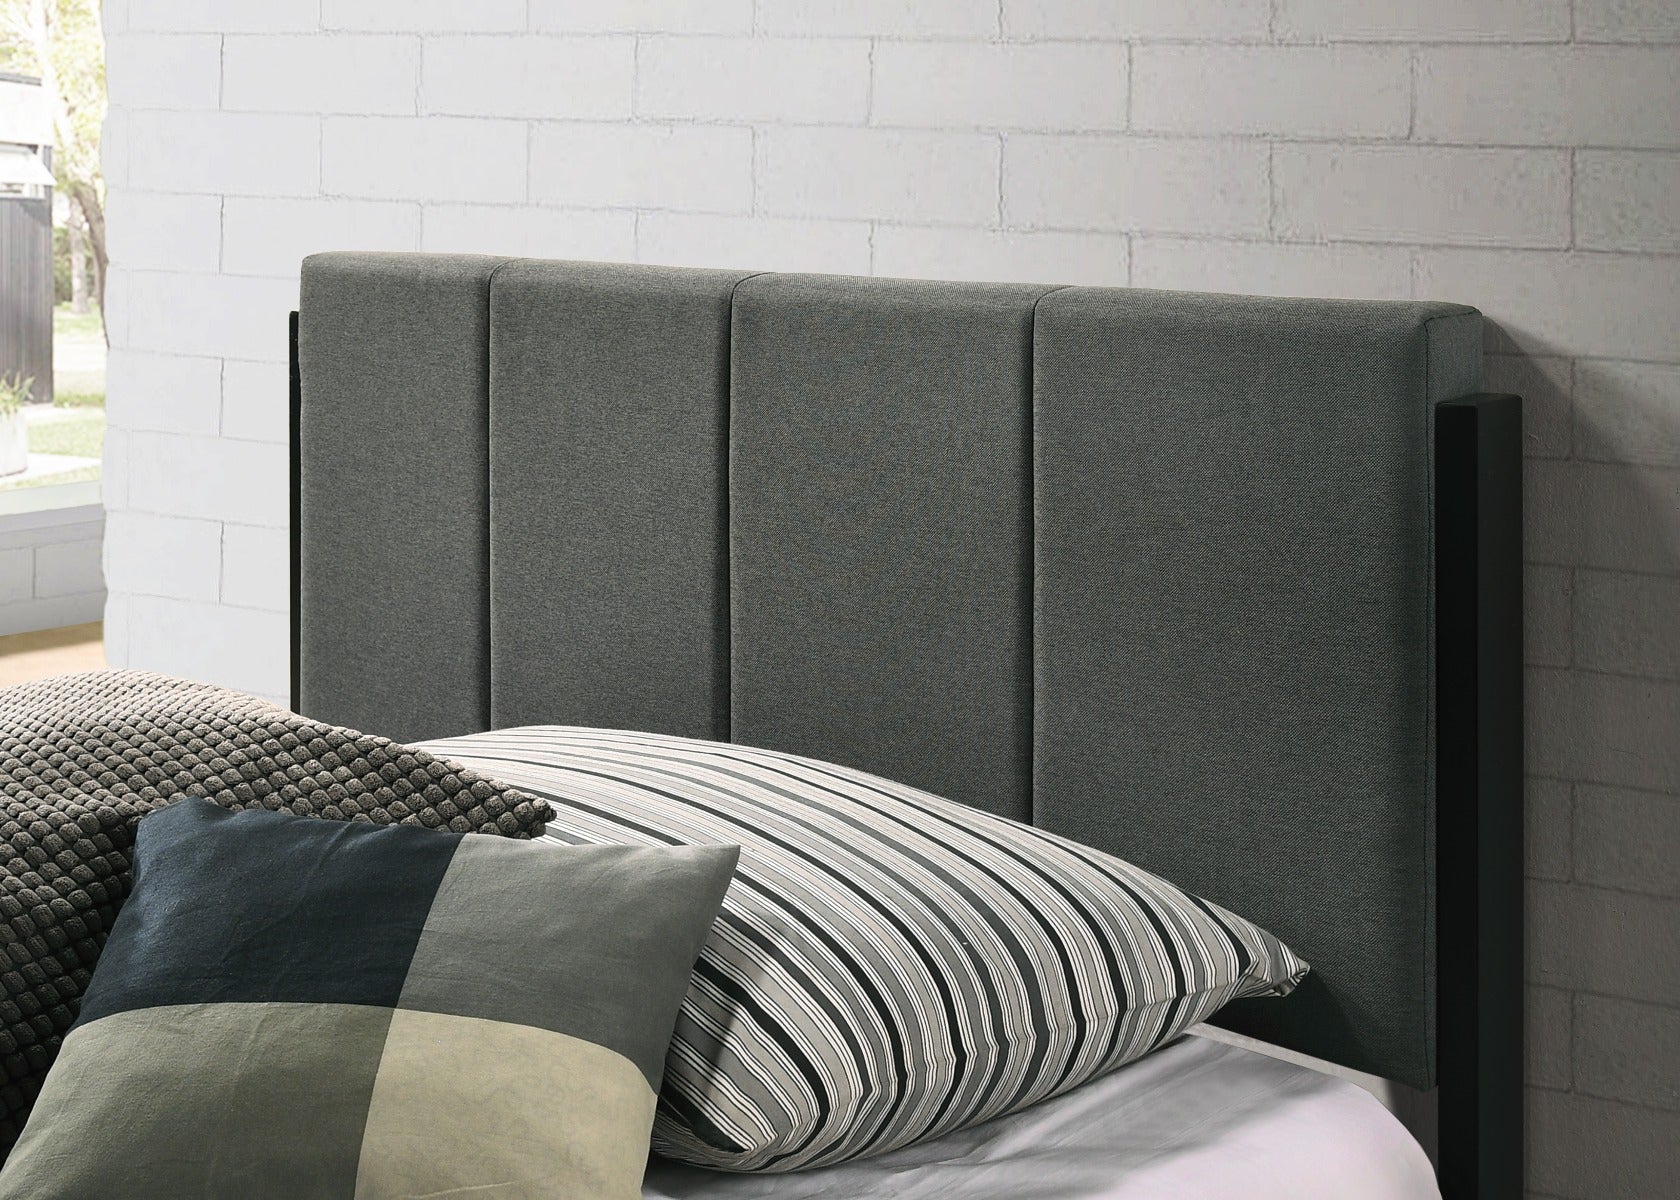 Fabric Upholstered Bed Frame in Charcoal - King